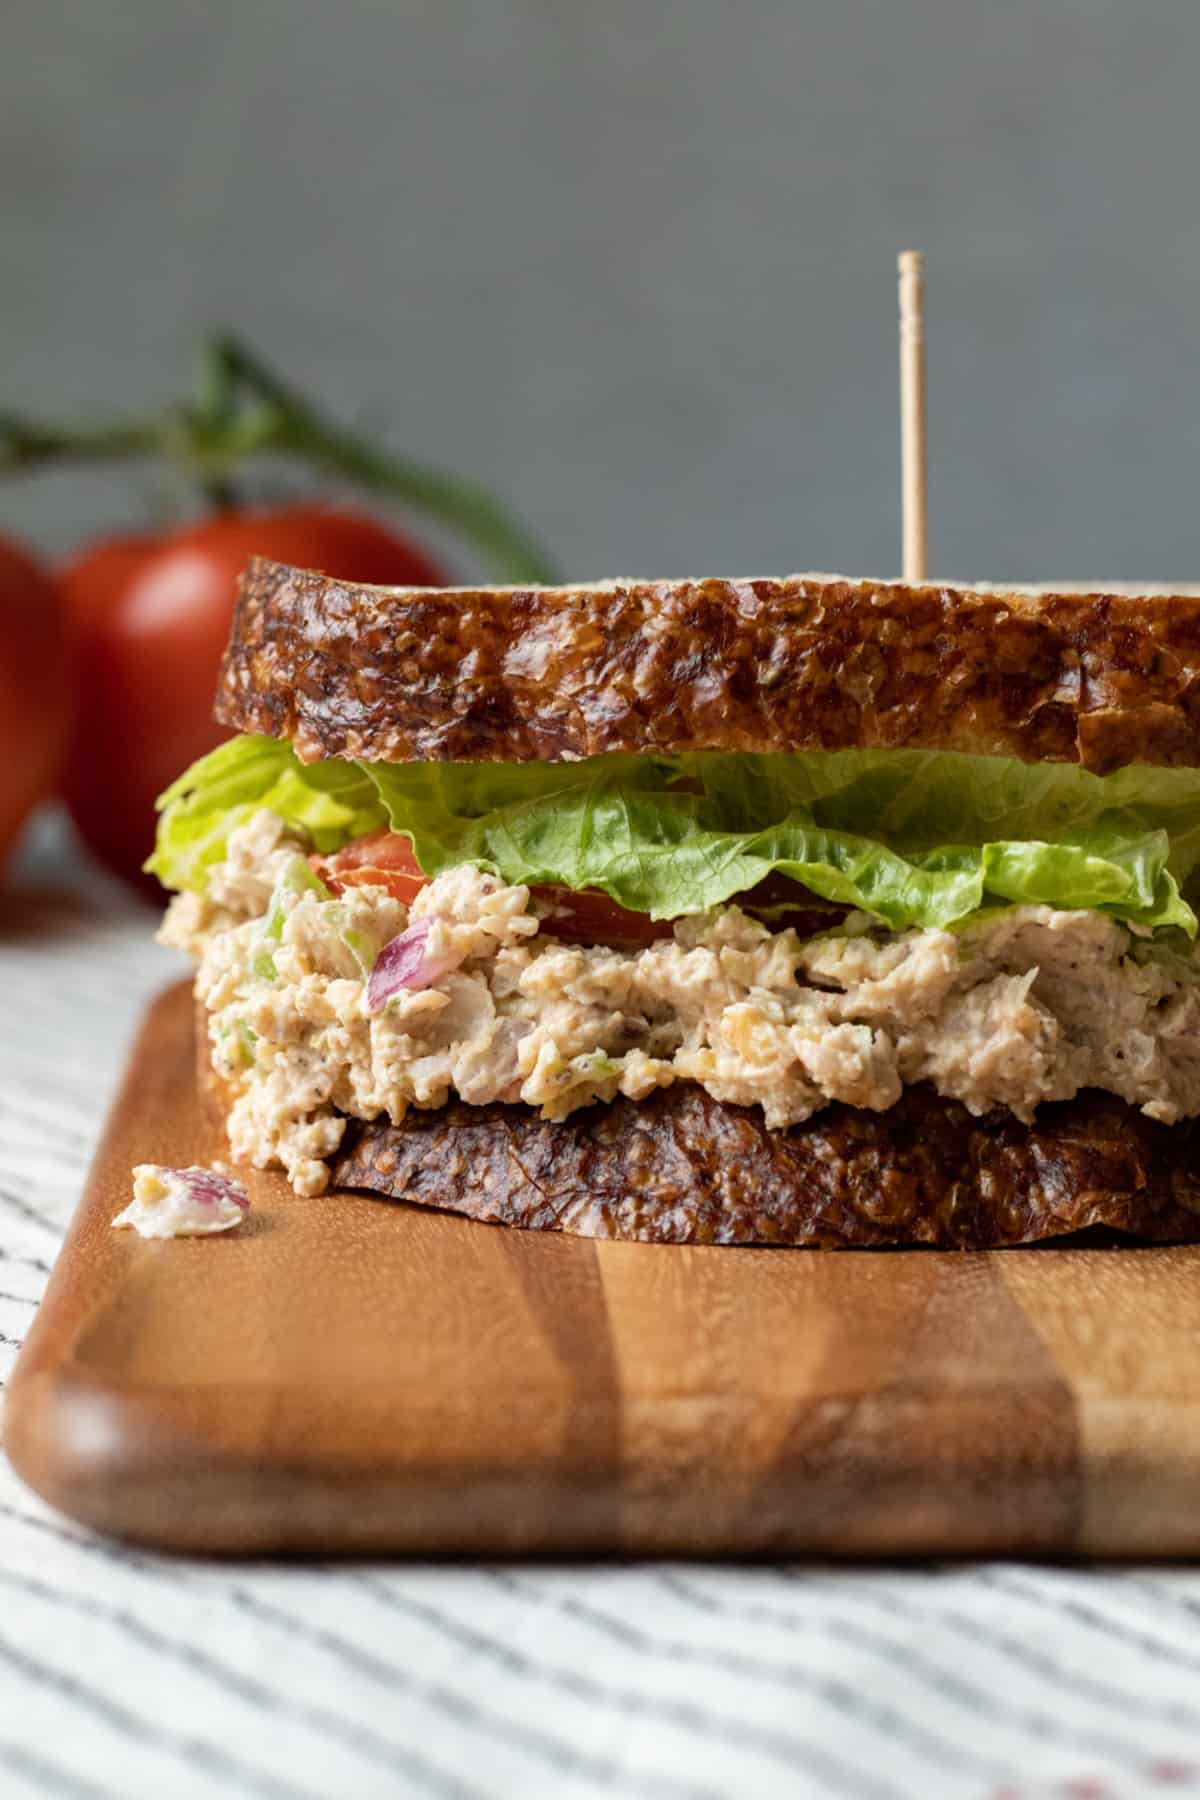 a sandwich with vegan tuna on a wooden board with tomatoes in the background